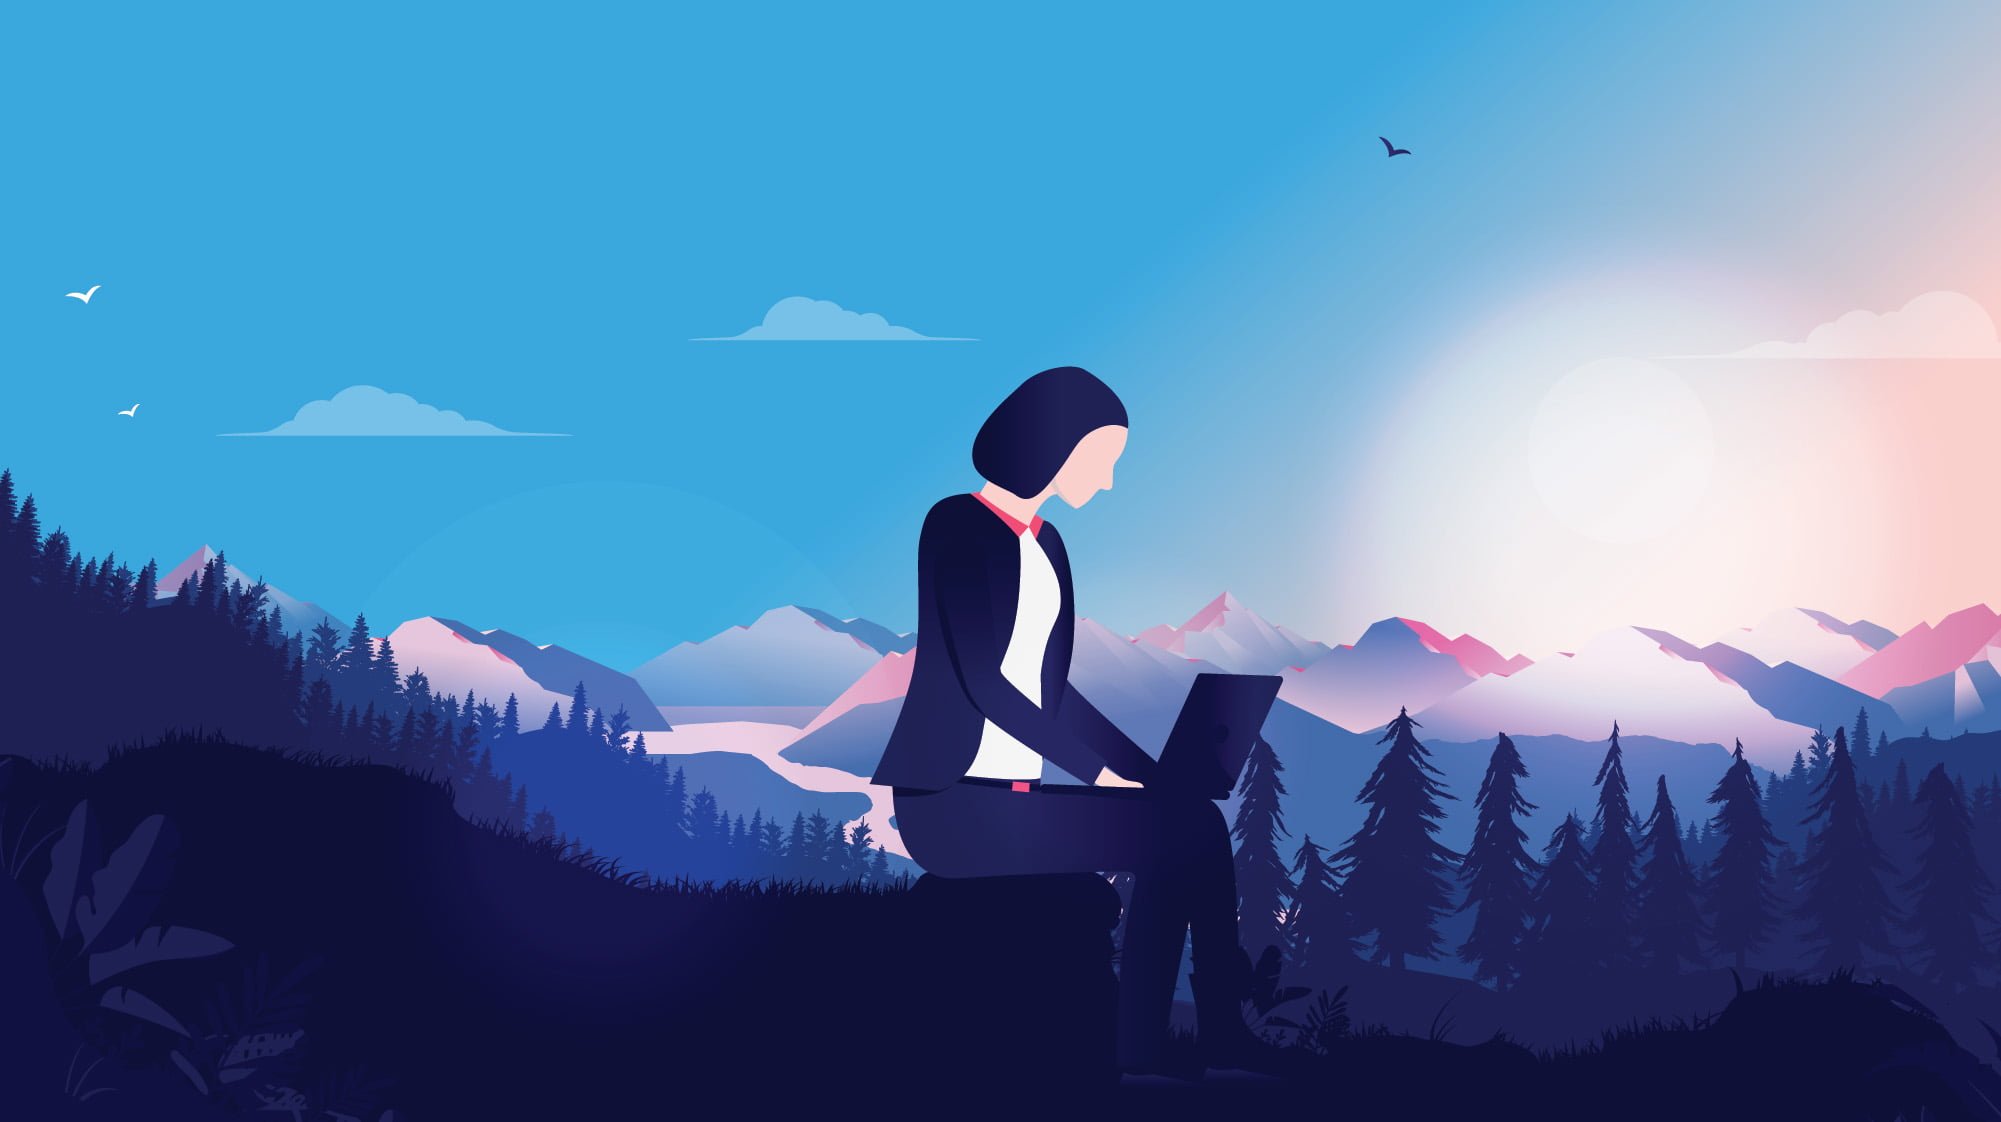 Remote worker in Norway mountains